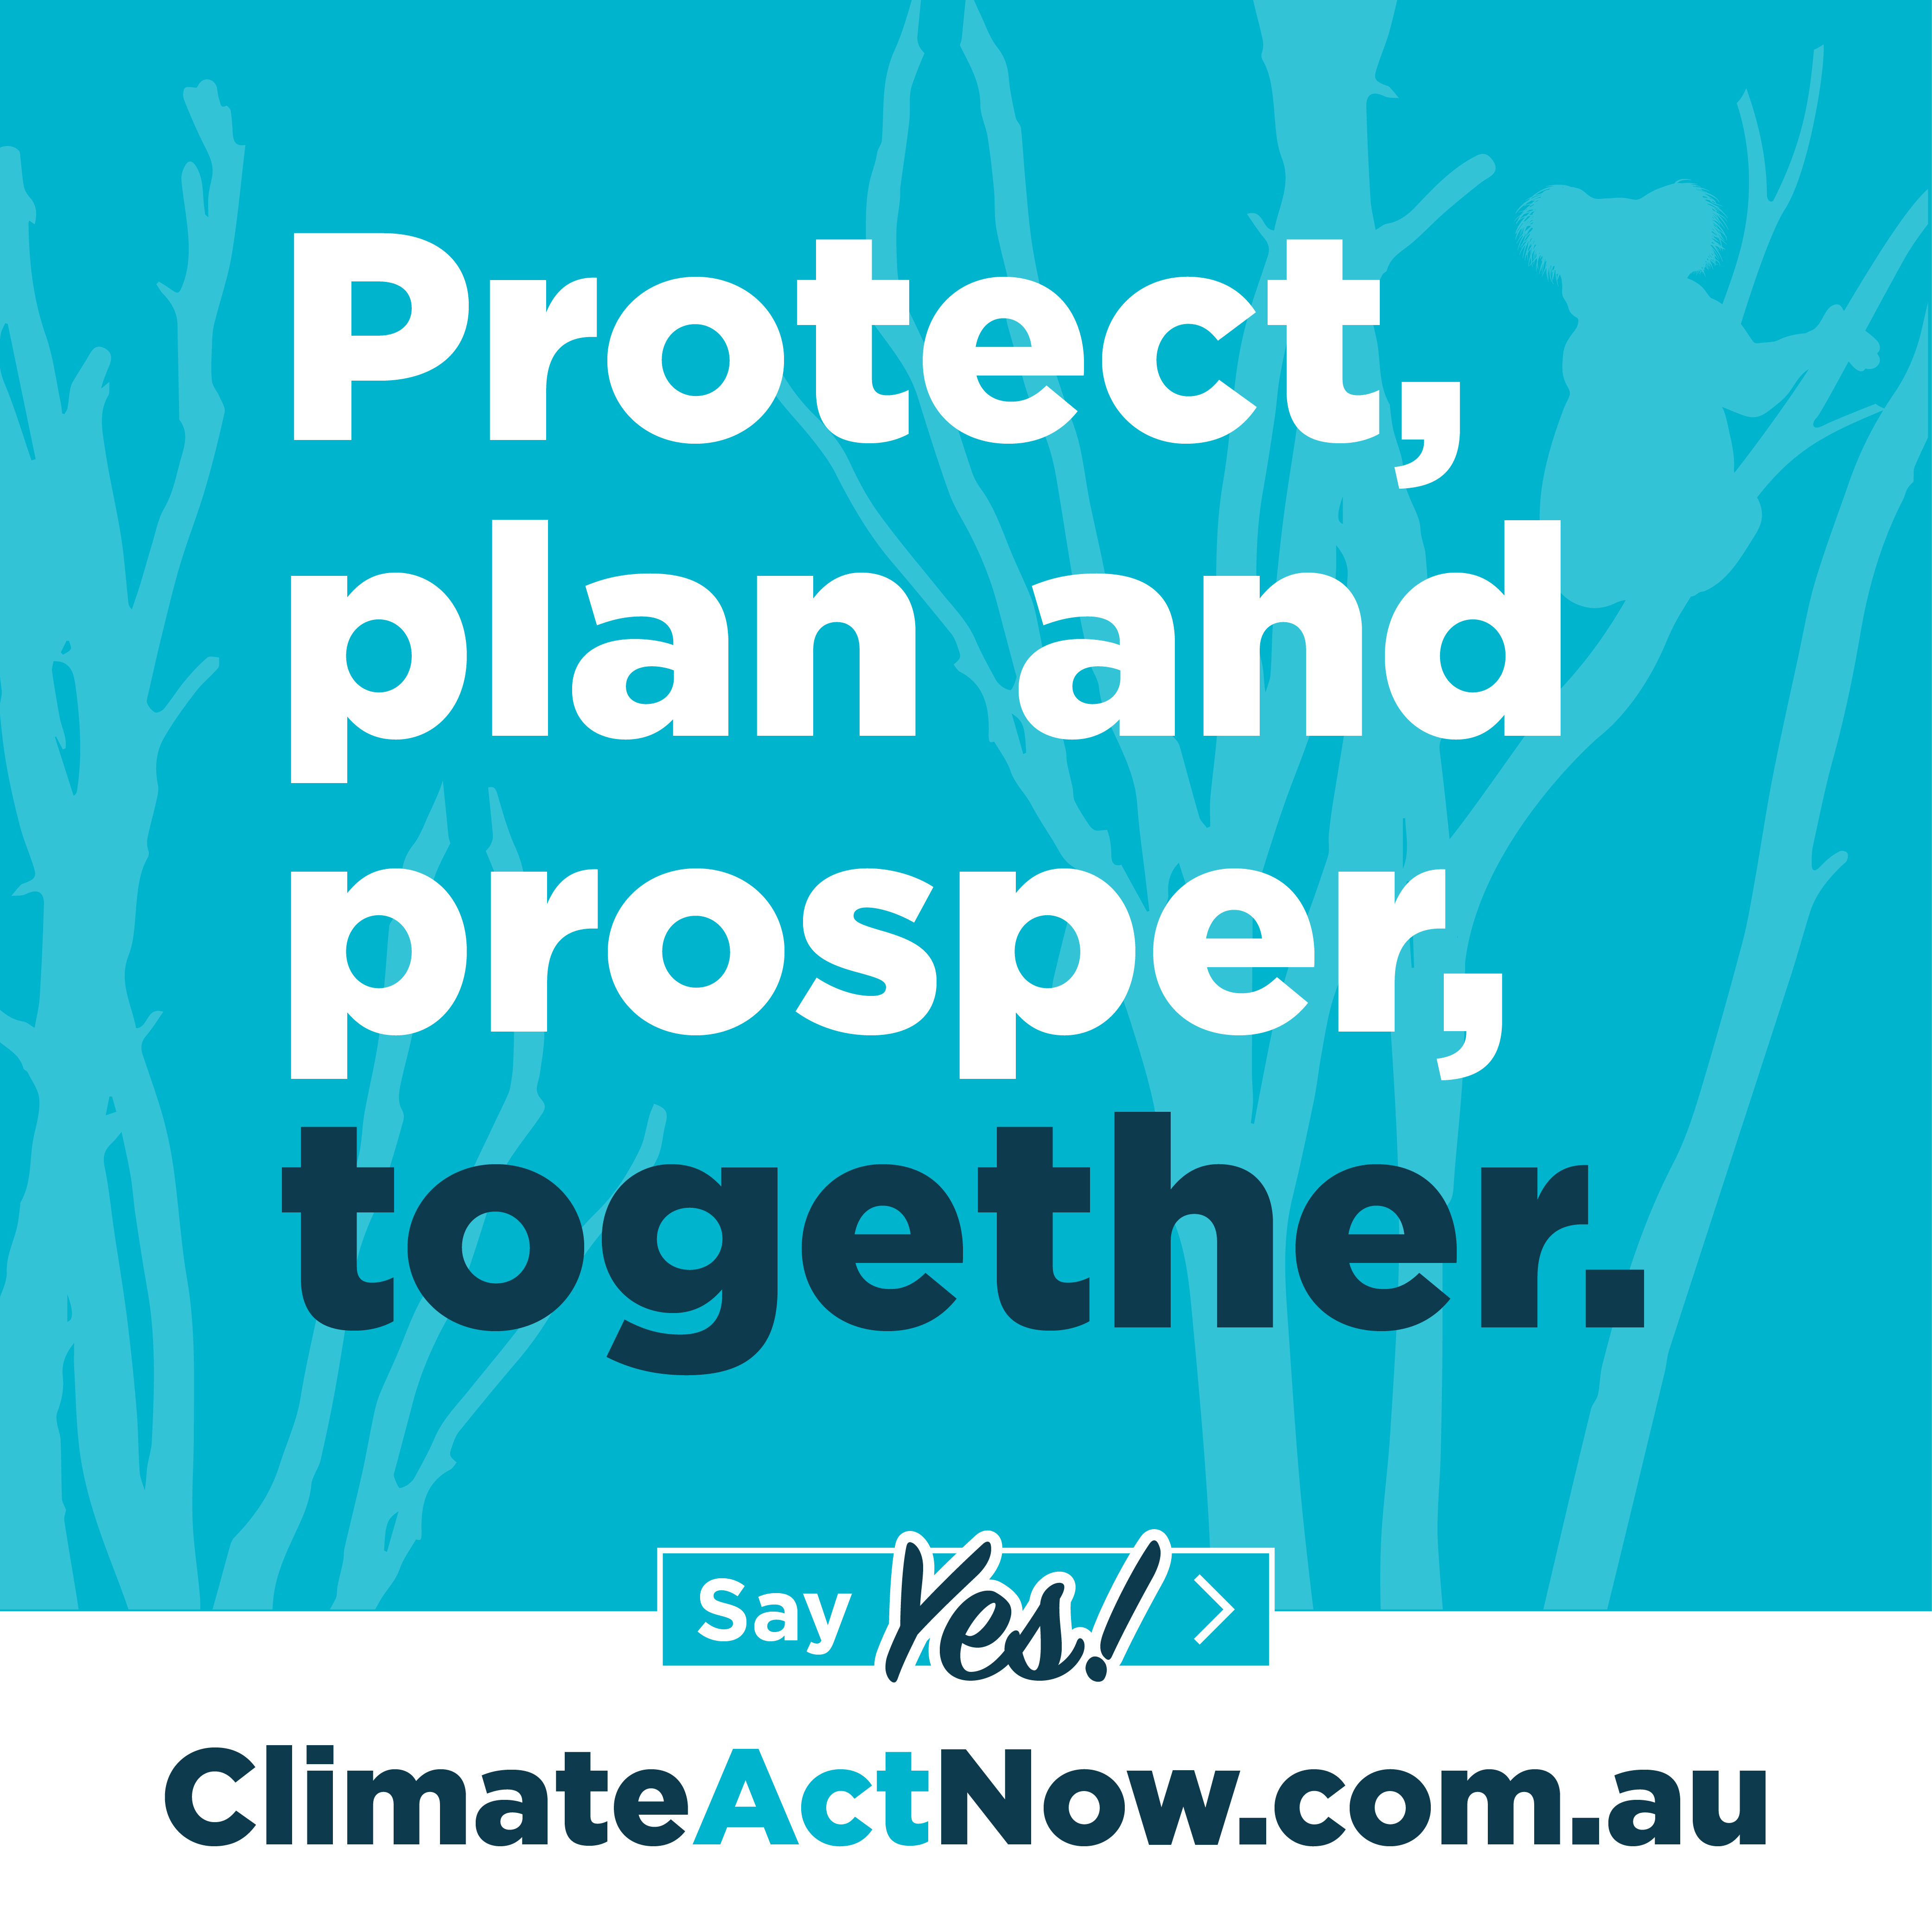 Post 1 1 Let’s get 2 million to sign the Climate Act Now petition!